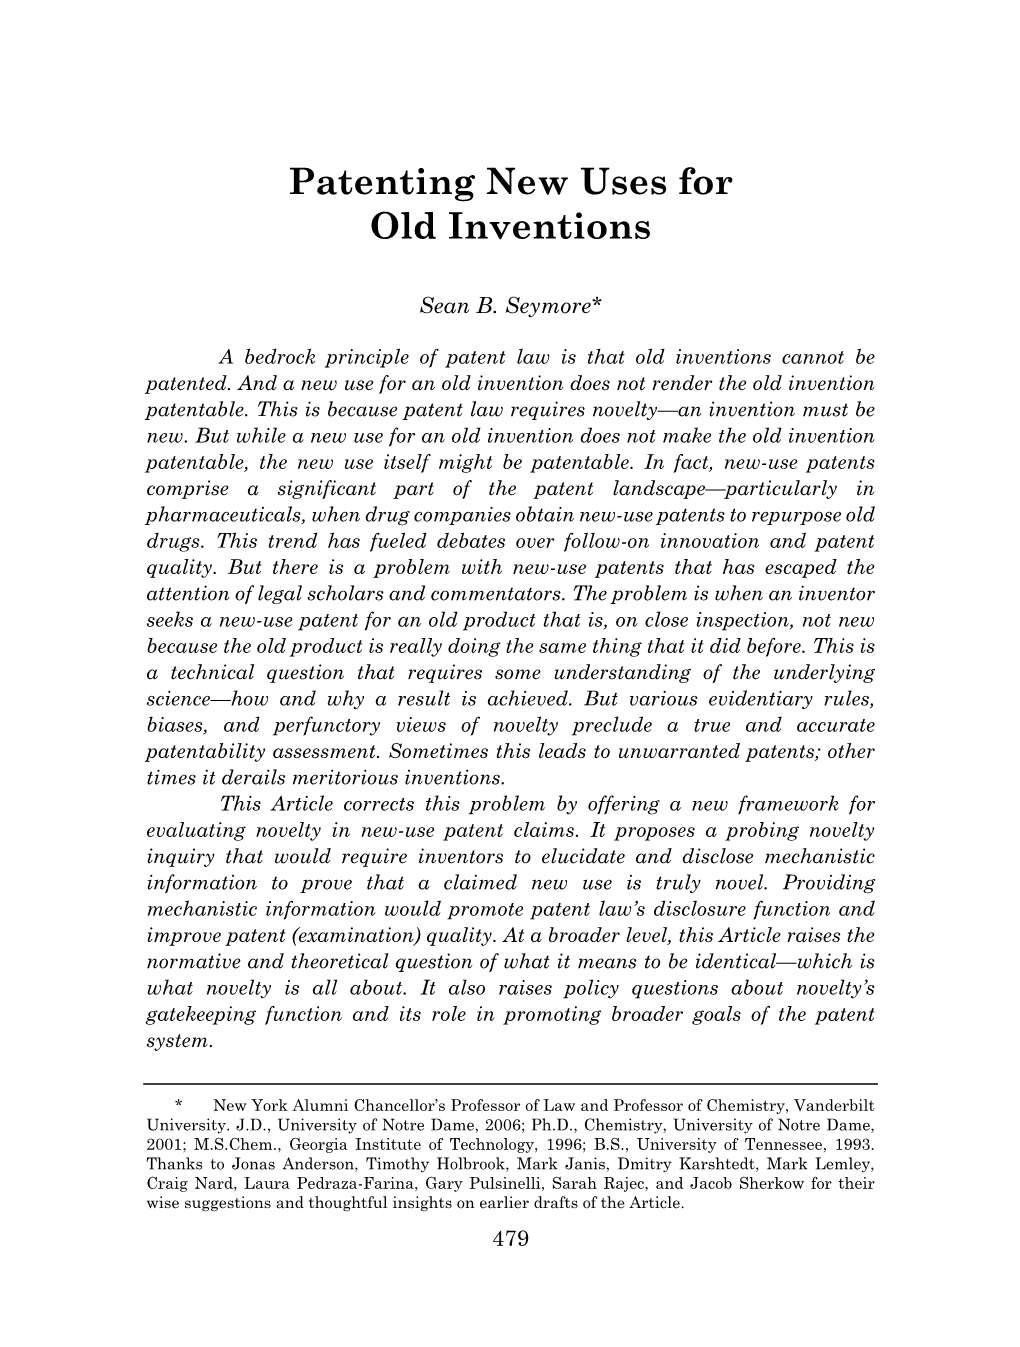 Patenting New Uses for Old Inventions